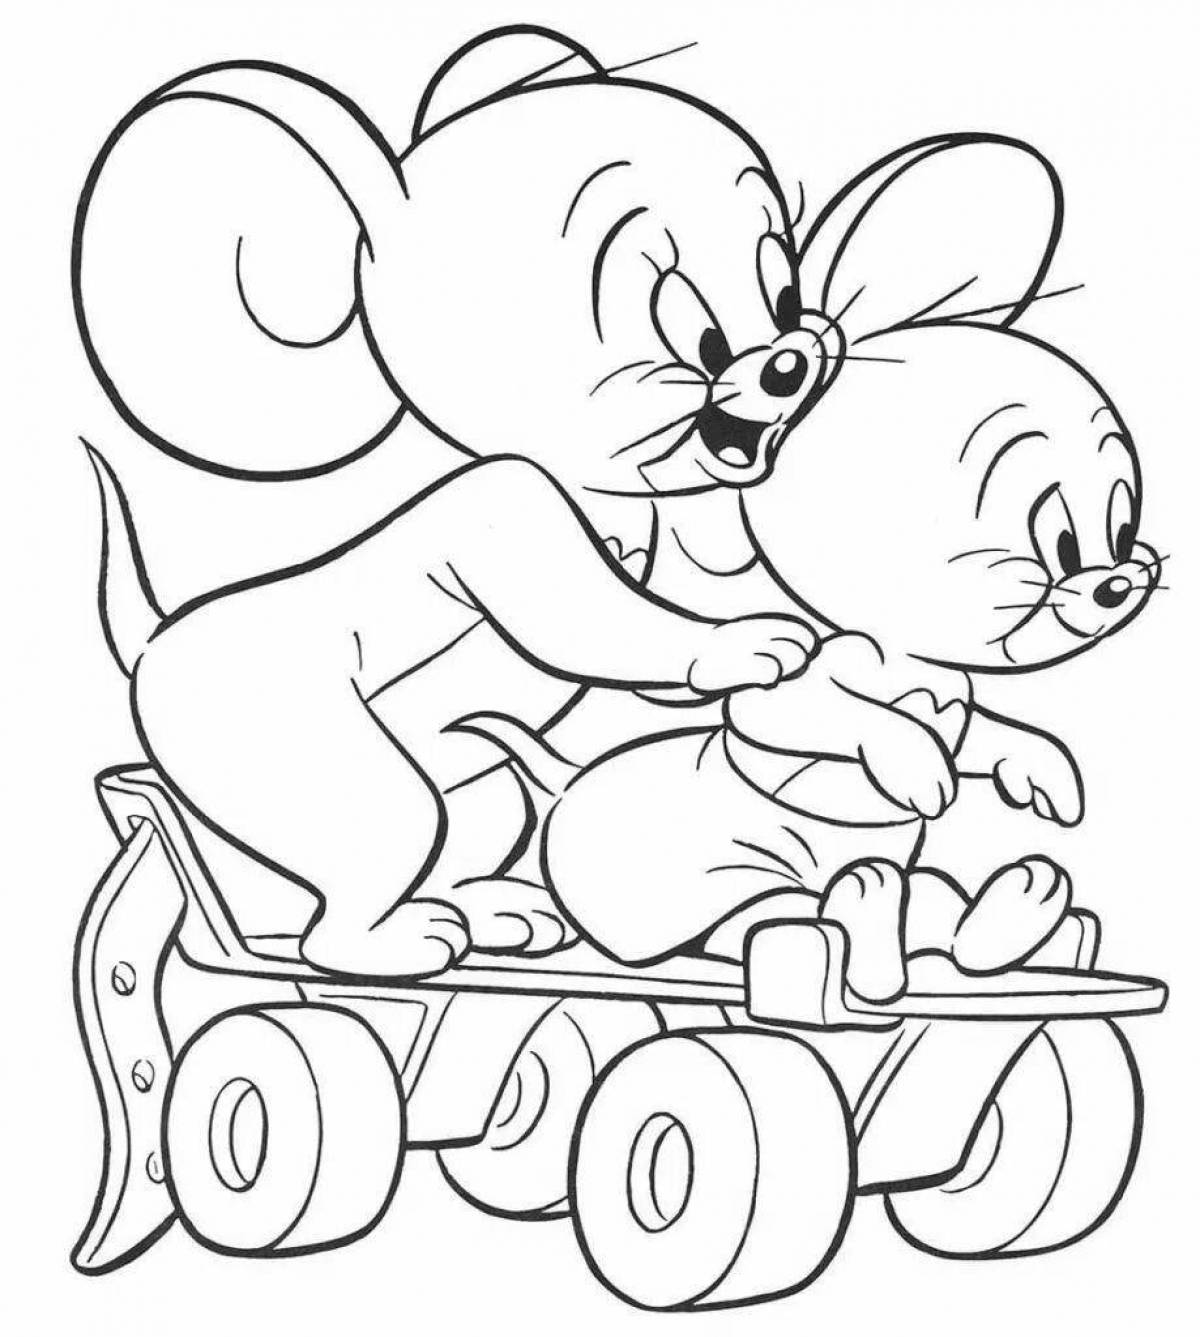 Creative coloring pages for children 5 years old